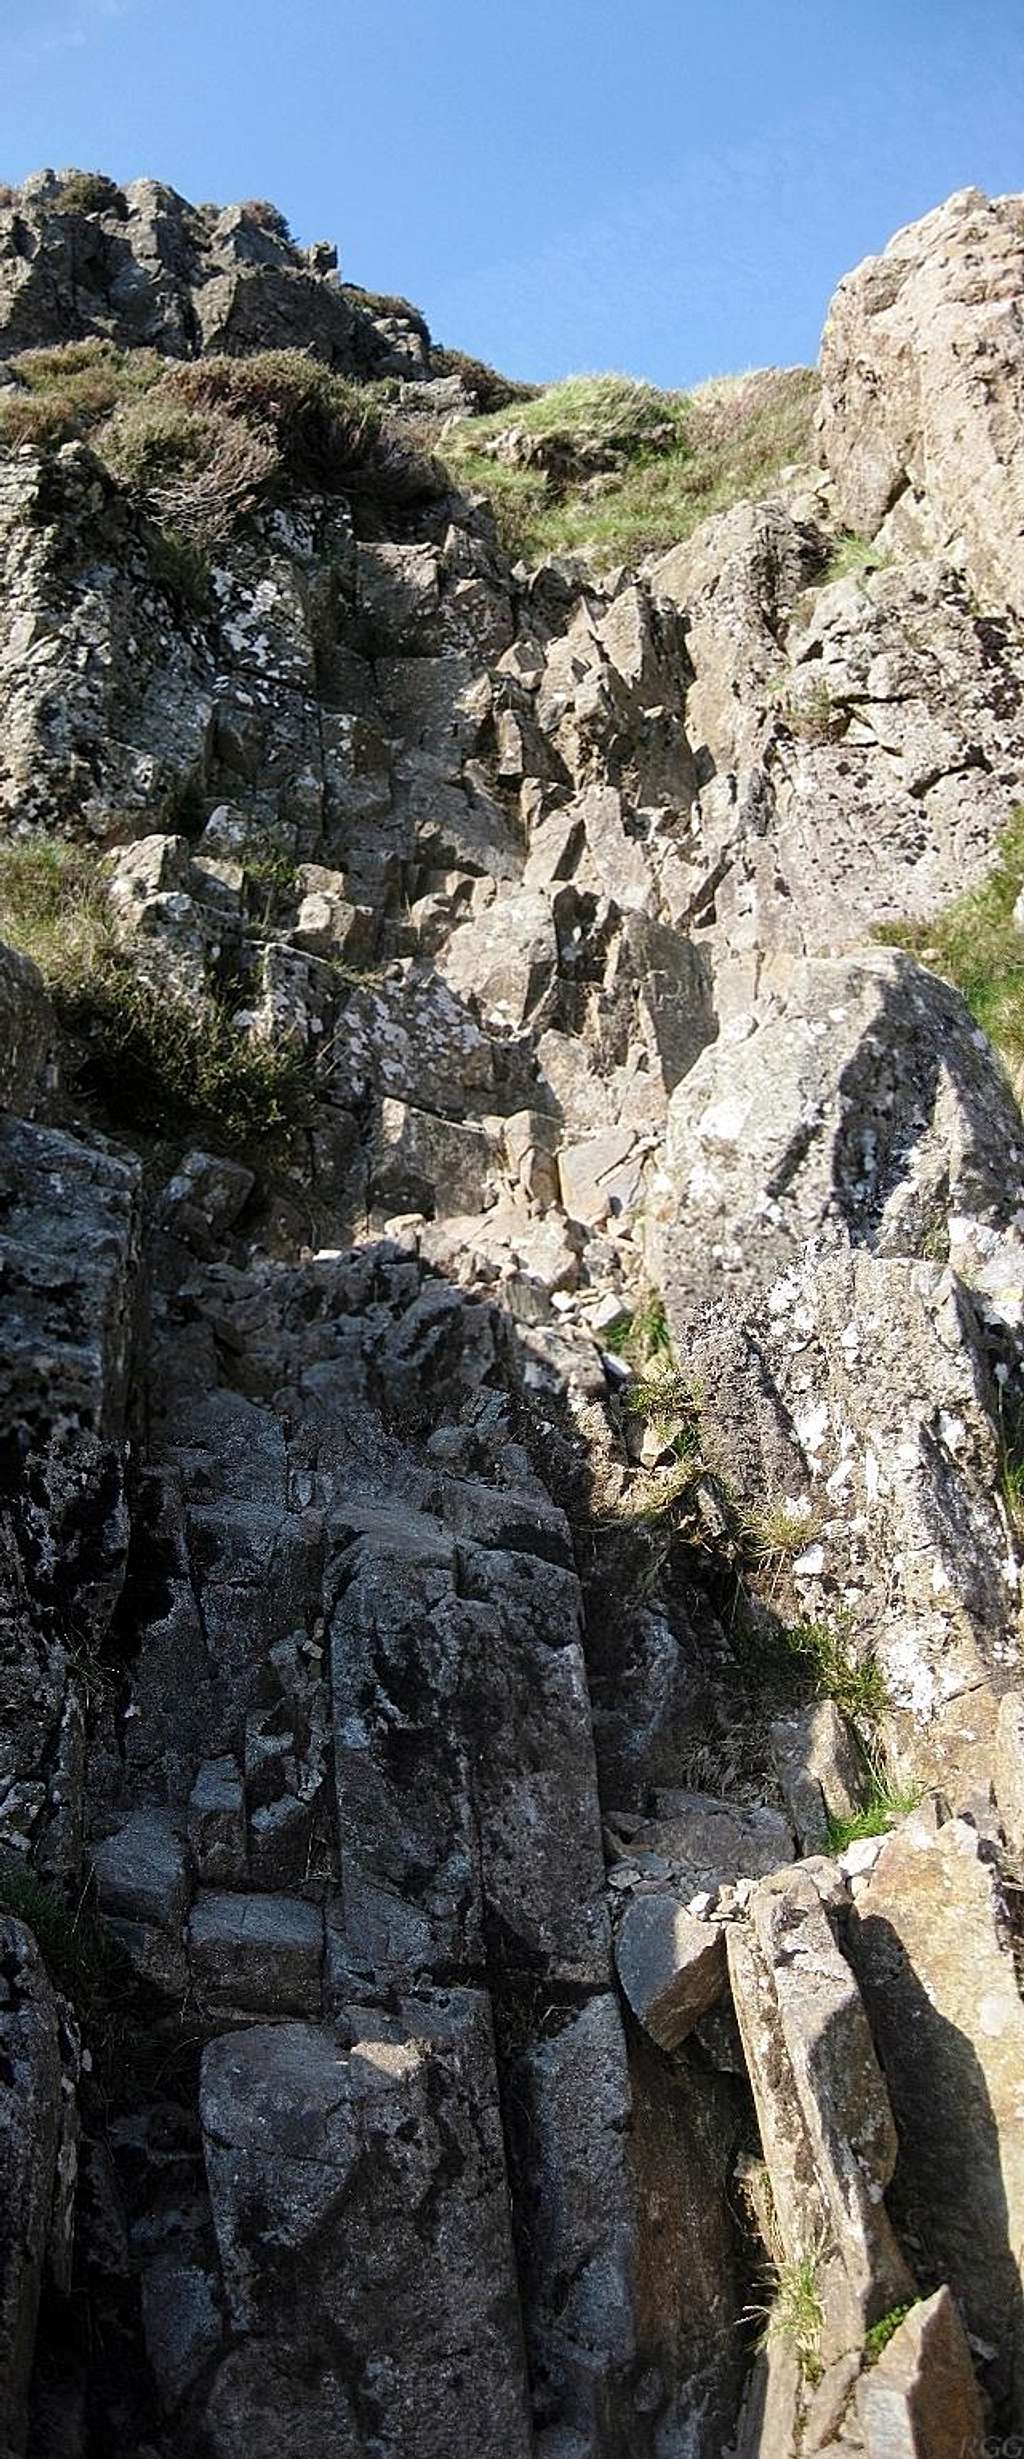 A few more meters of scrambling required